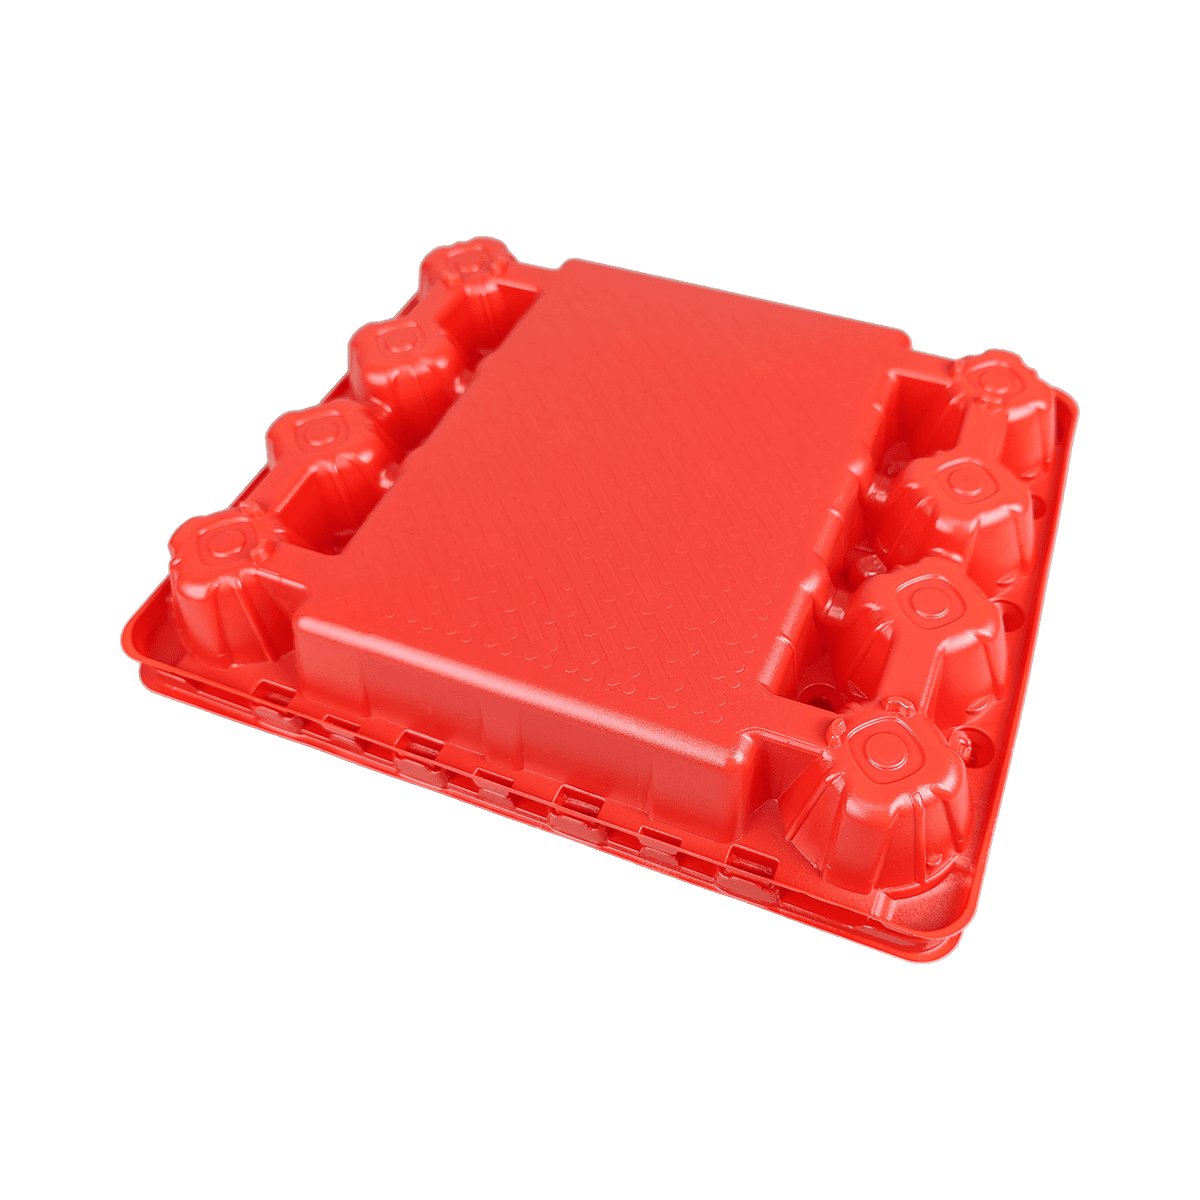 Reusable Matte Red PET 20 Egg Cartons Suitable For Home Pasture Chicken Farms, Commercial Market Displays